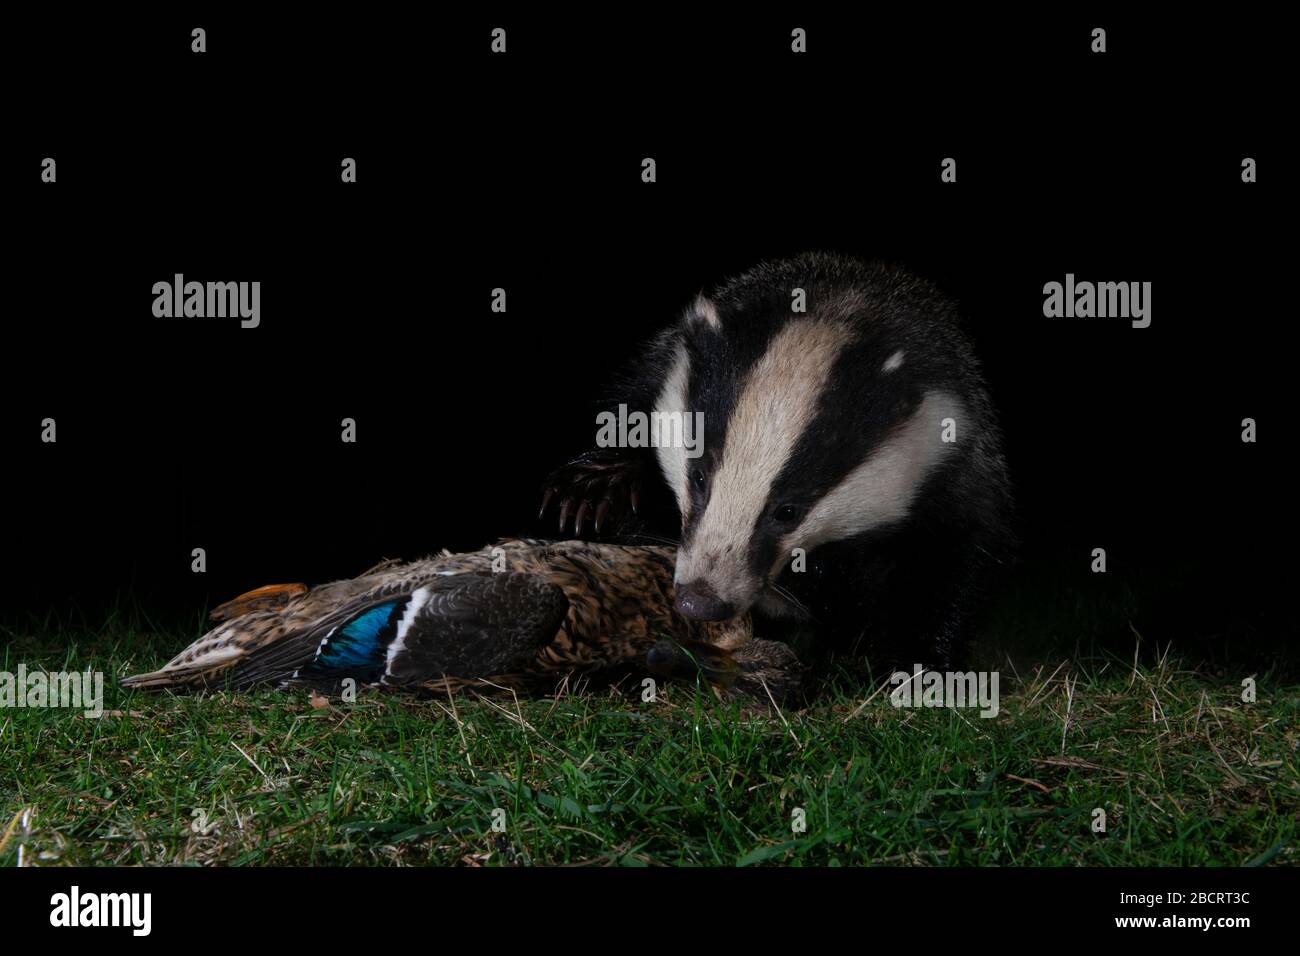 A badger scavenging a dead duck found at night, Kildary, Ross-shire,Scotland Stock Photo